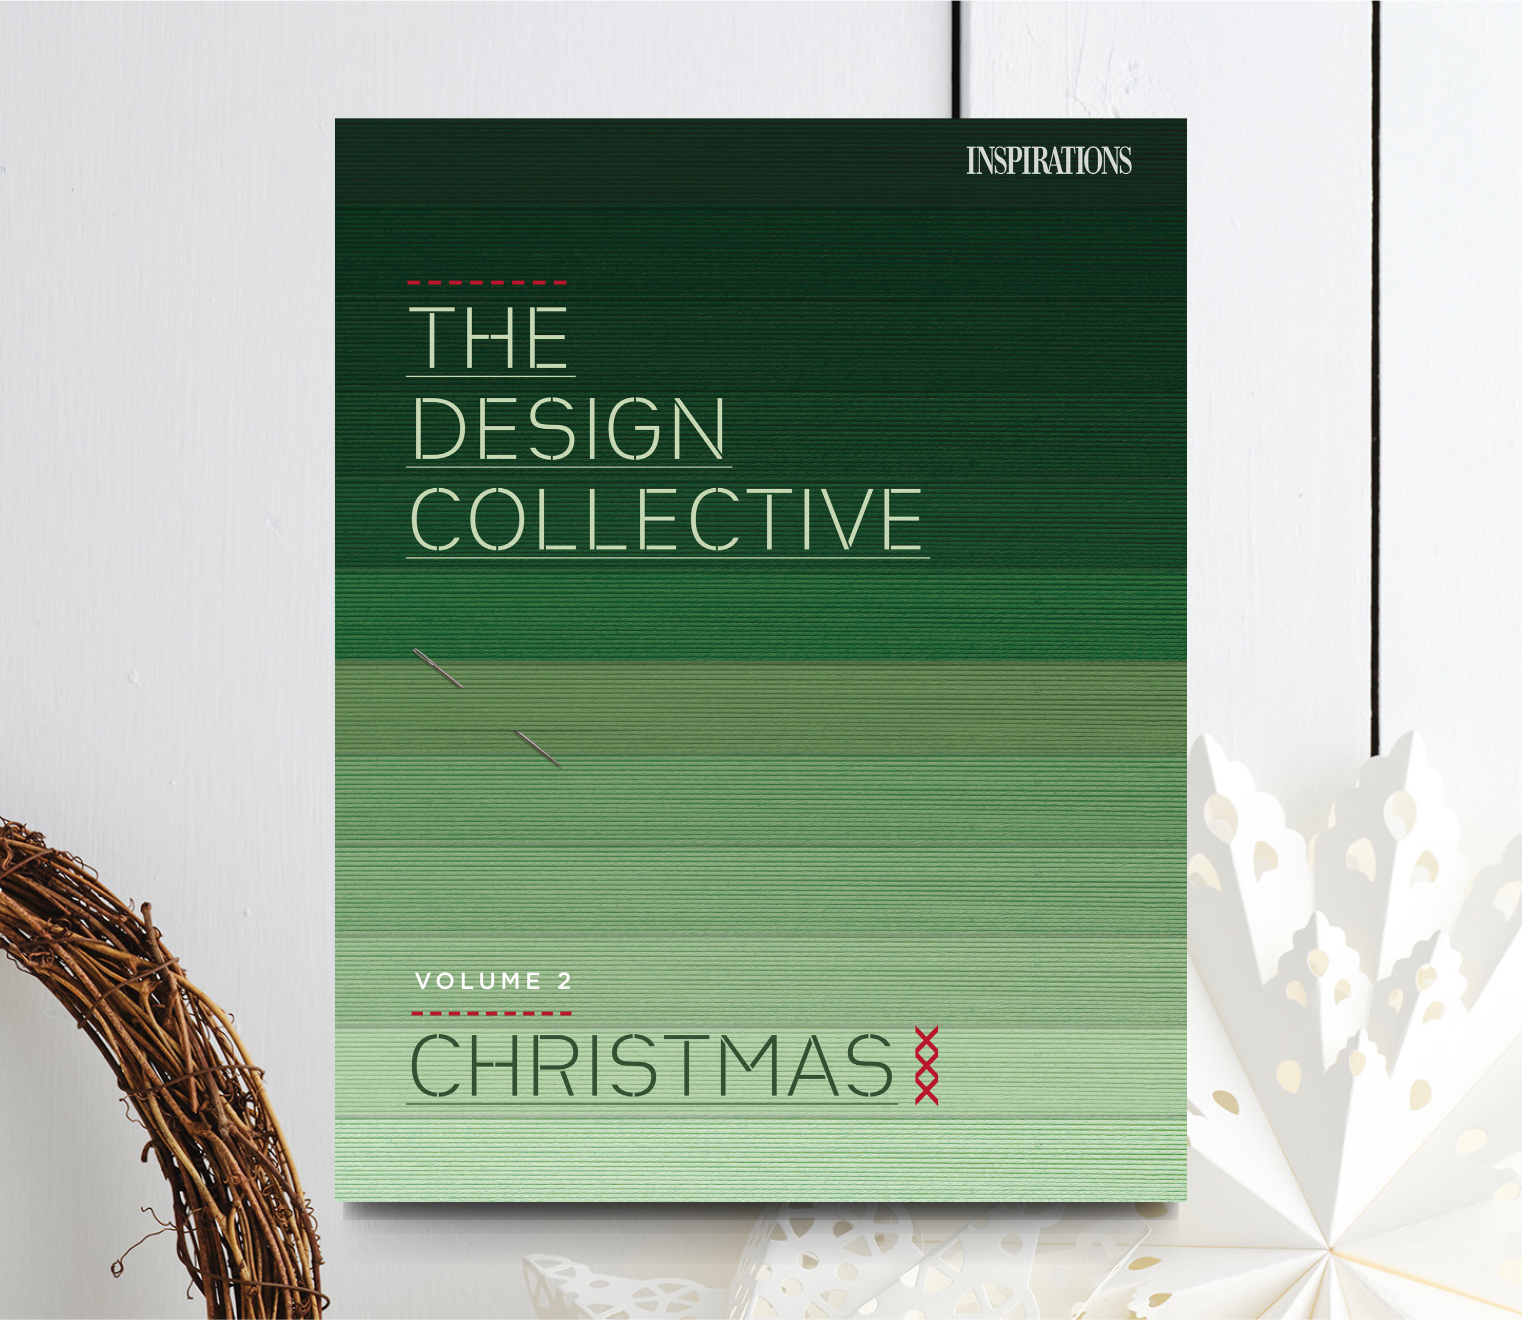 The Design Collective Volume 2 Christmas